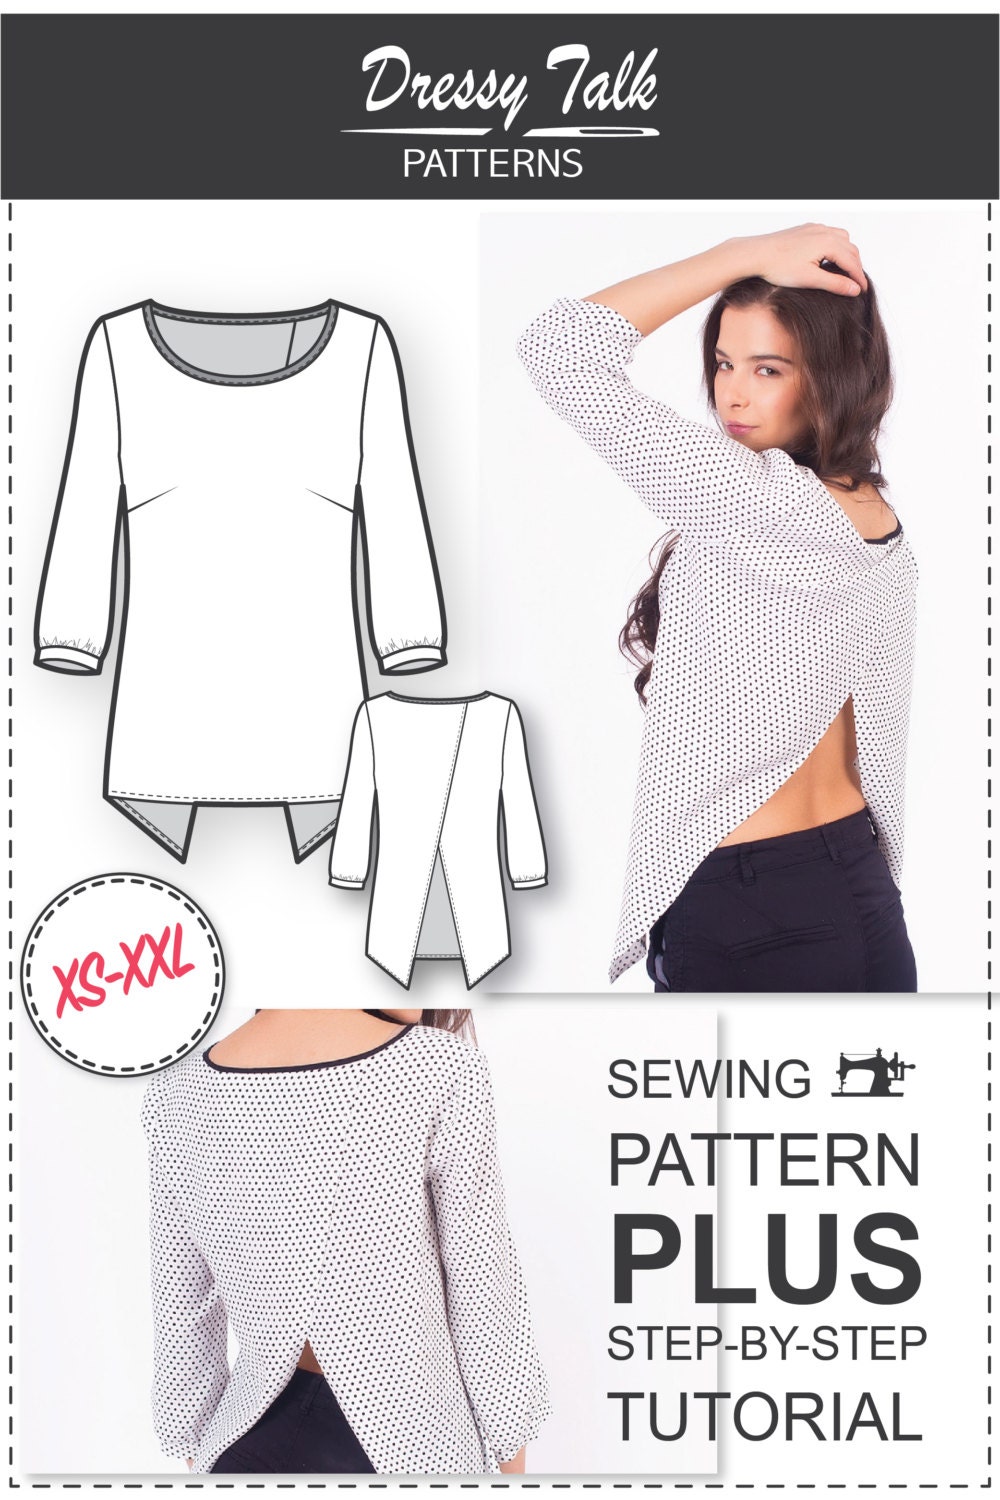 Top Patterns - Cross Back Top Pattern - Blouse Patterns - Sewing ...